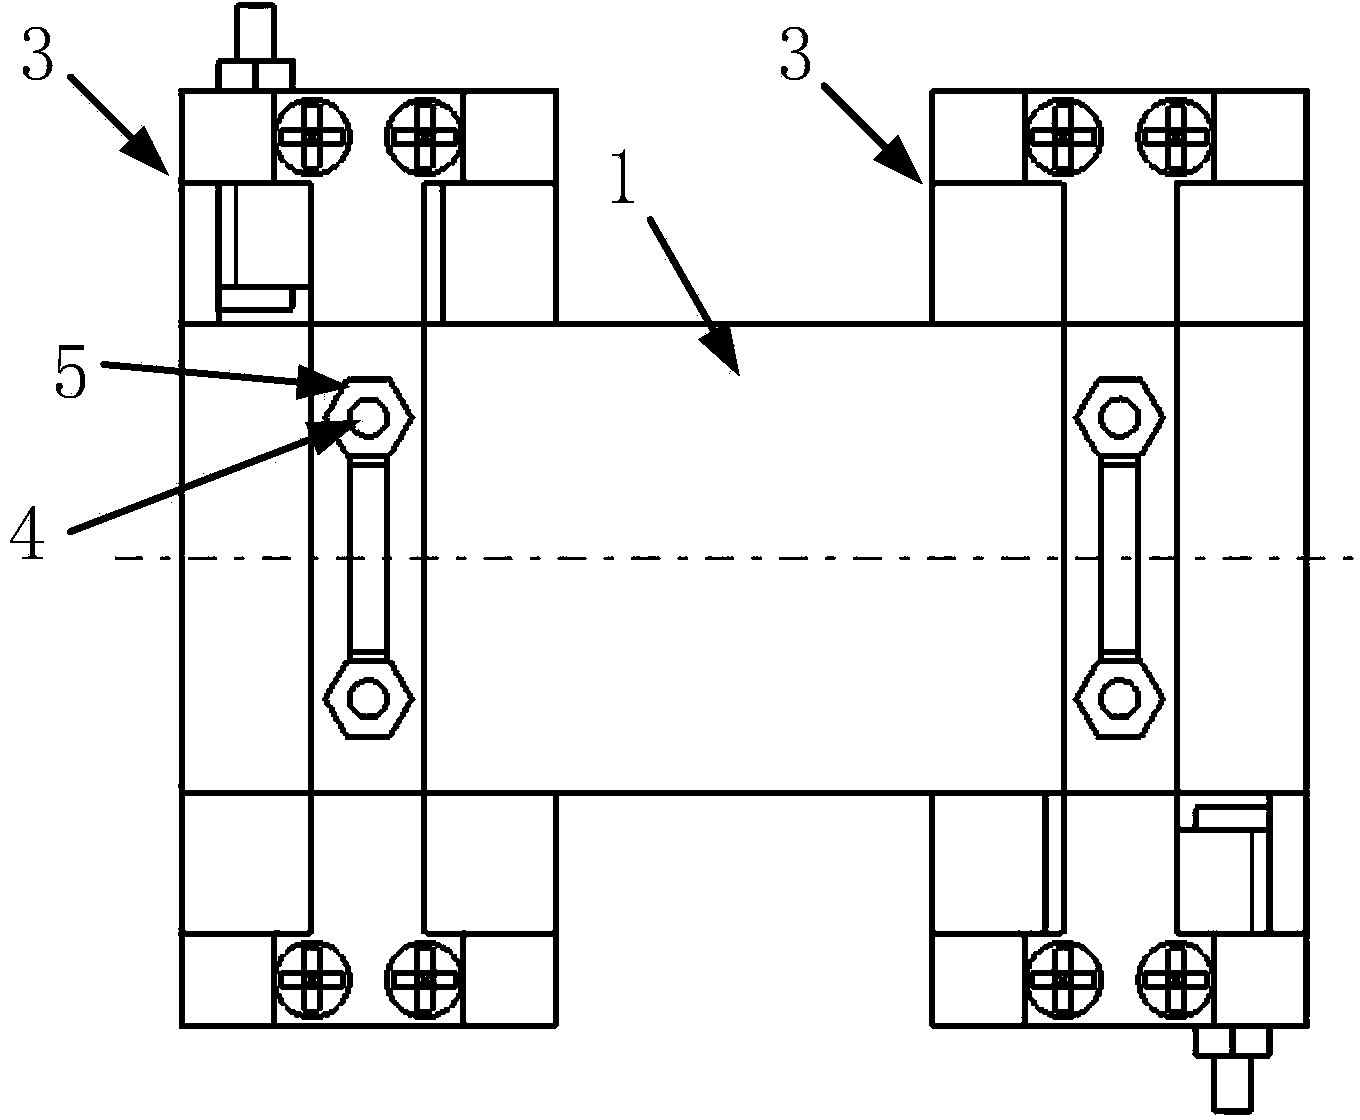 Tuned passive damper with two degrees of freedom